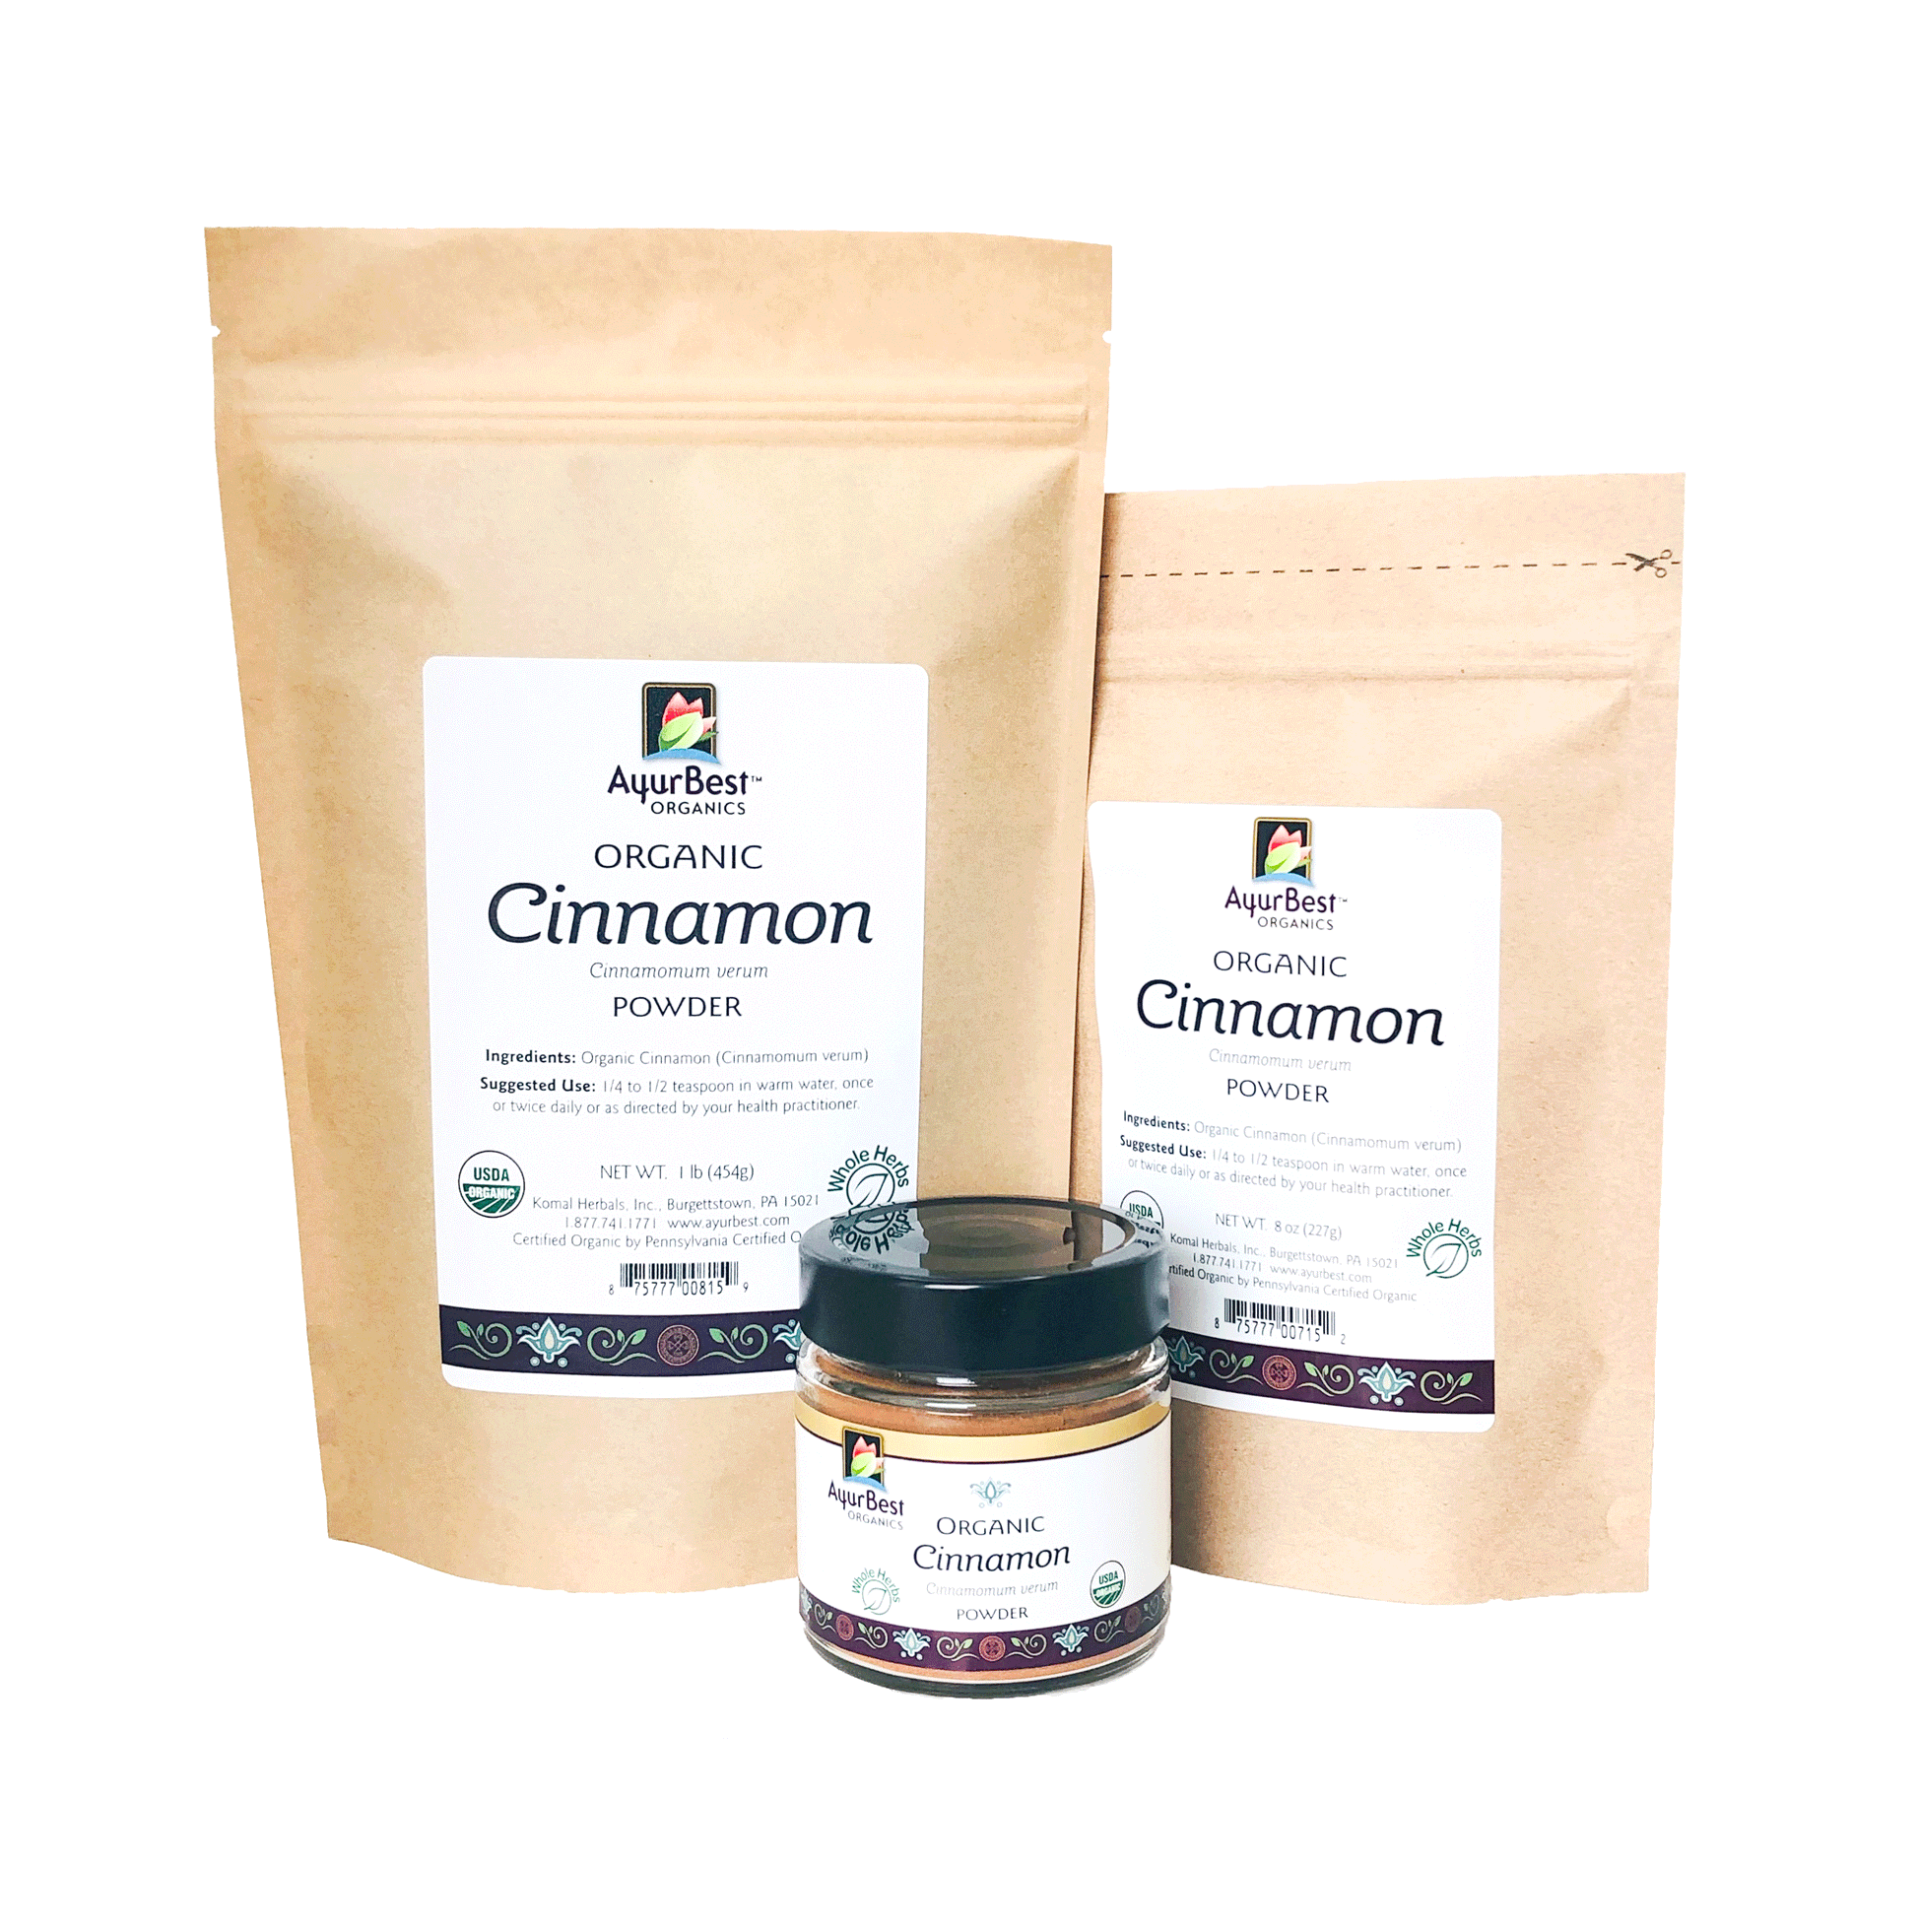 Organic Cinnamon Powder packed in USA available in 3 great sizes!